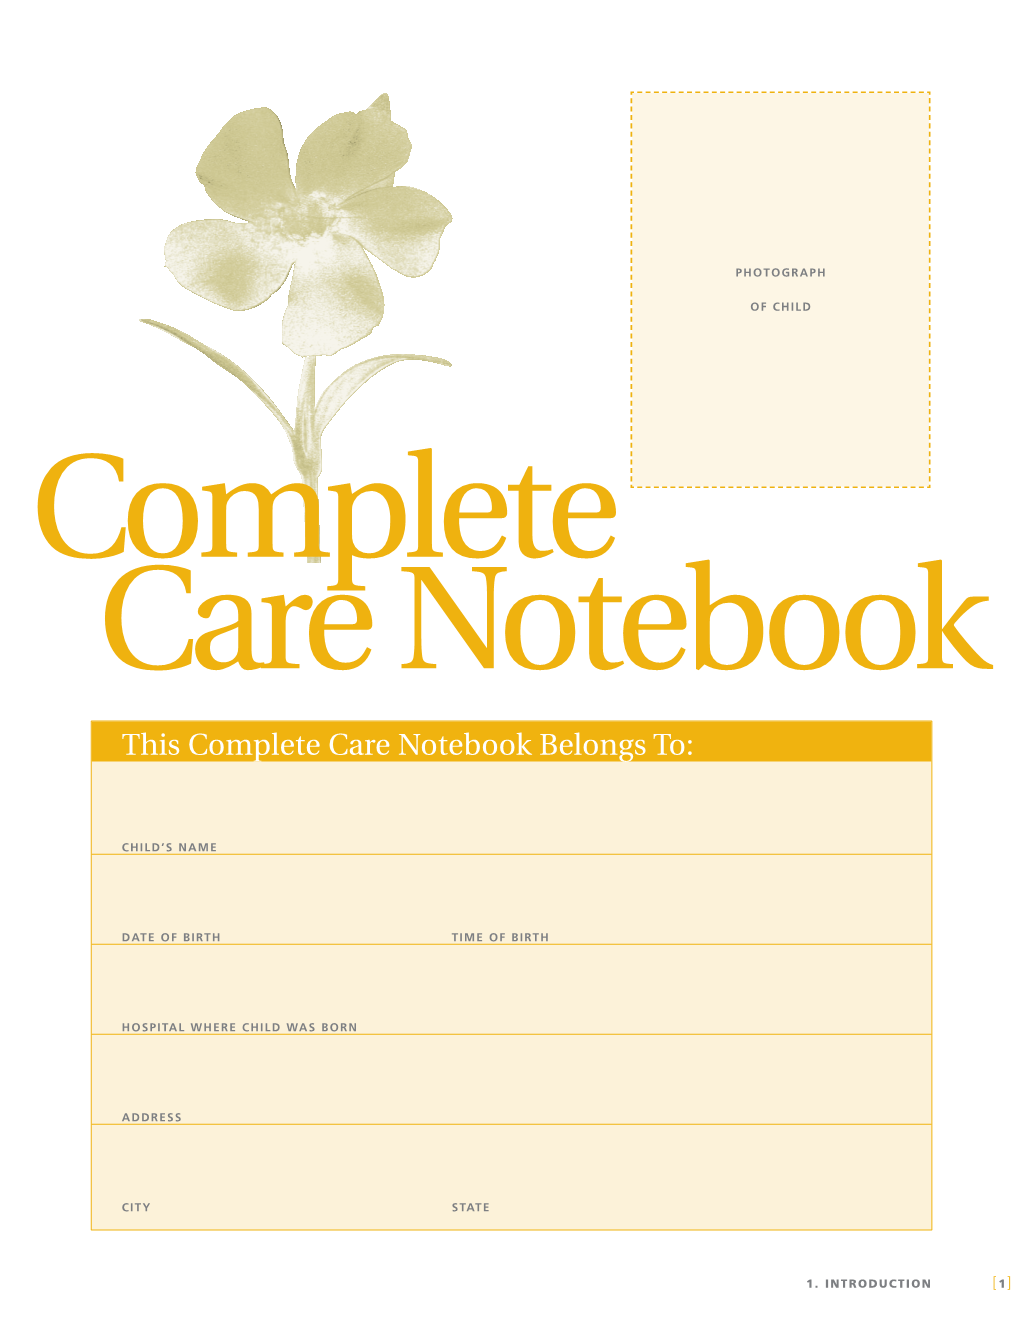 This Complete Care Notebook Belongs To